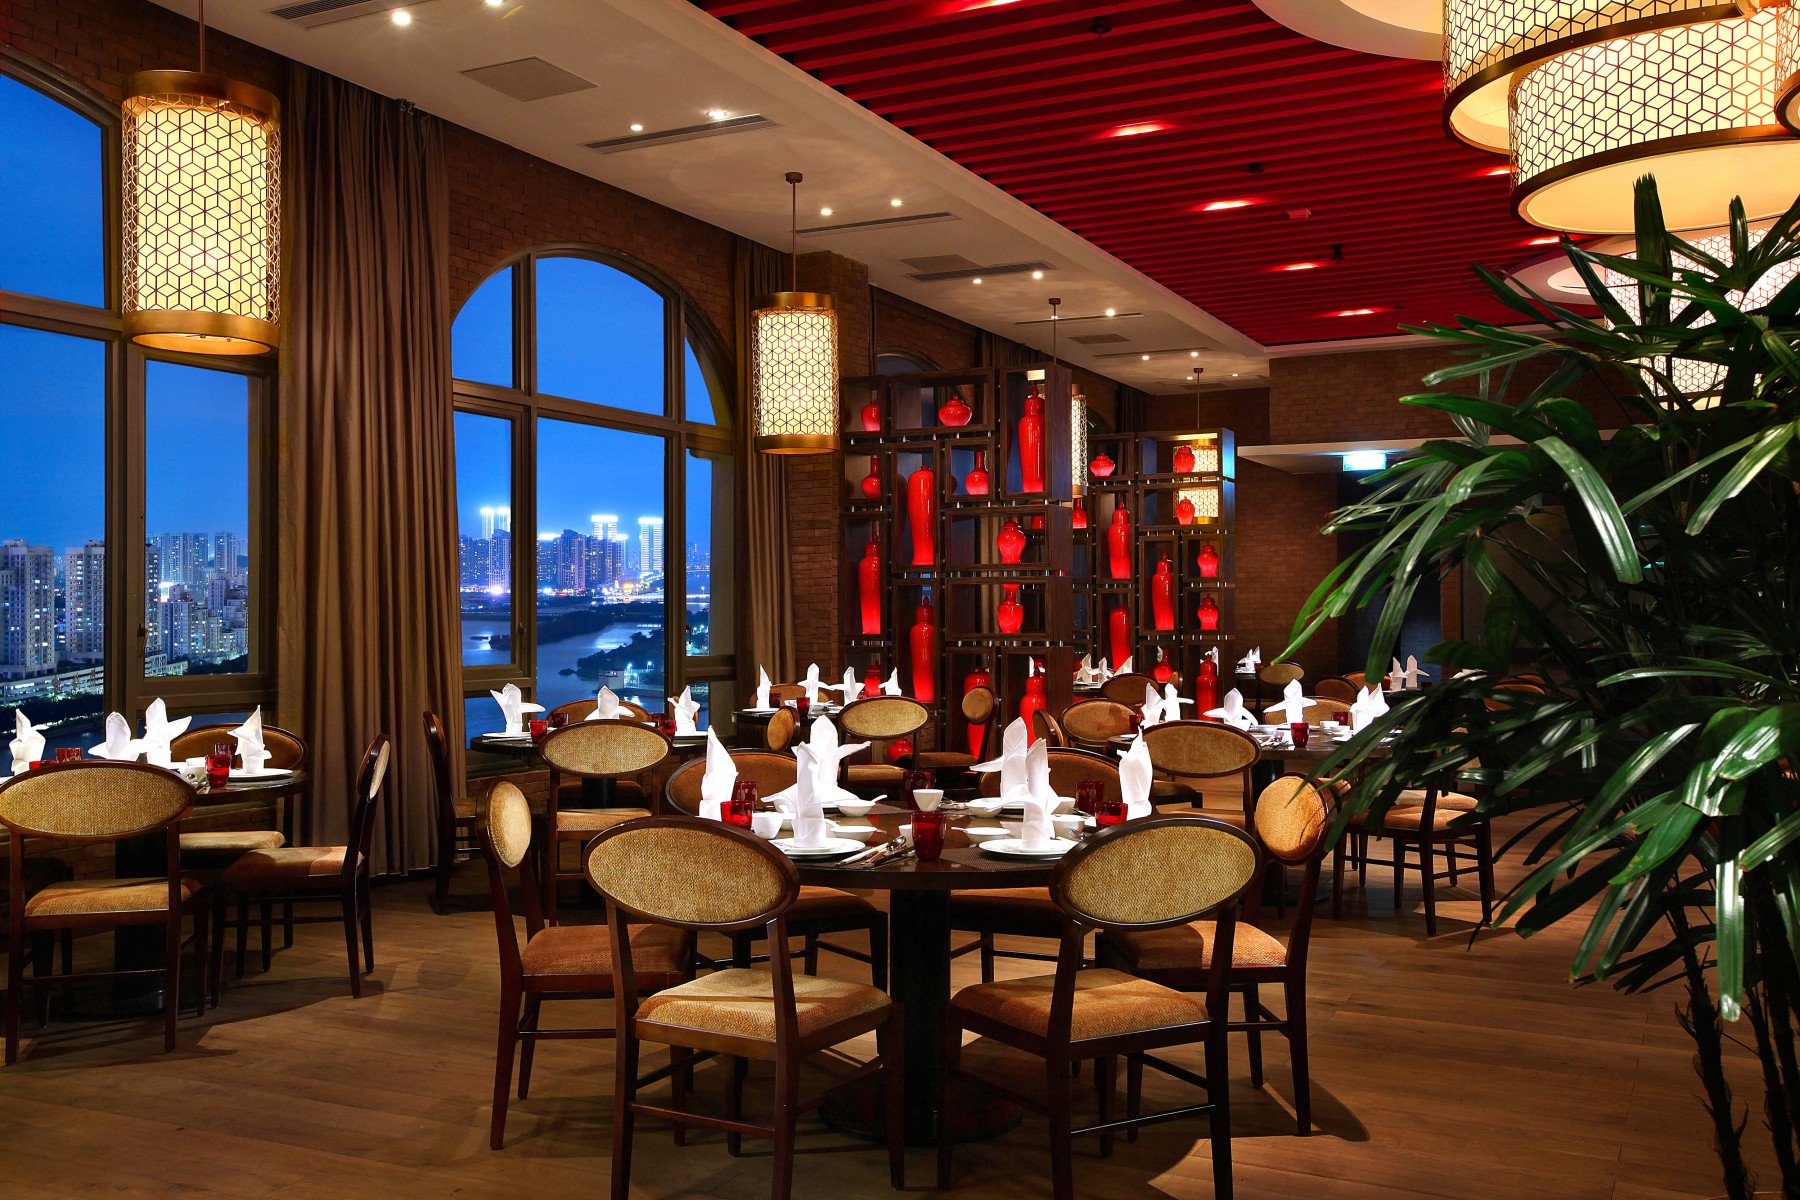 Le Chinois: Dining Room